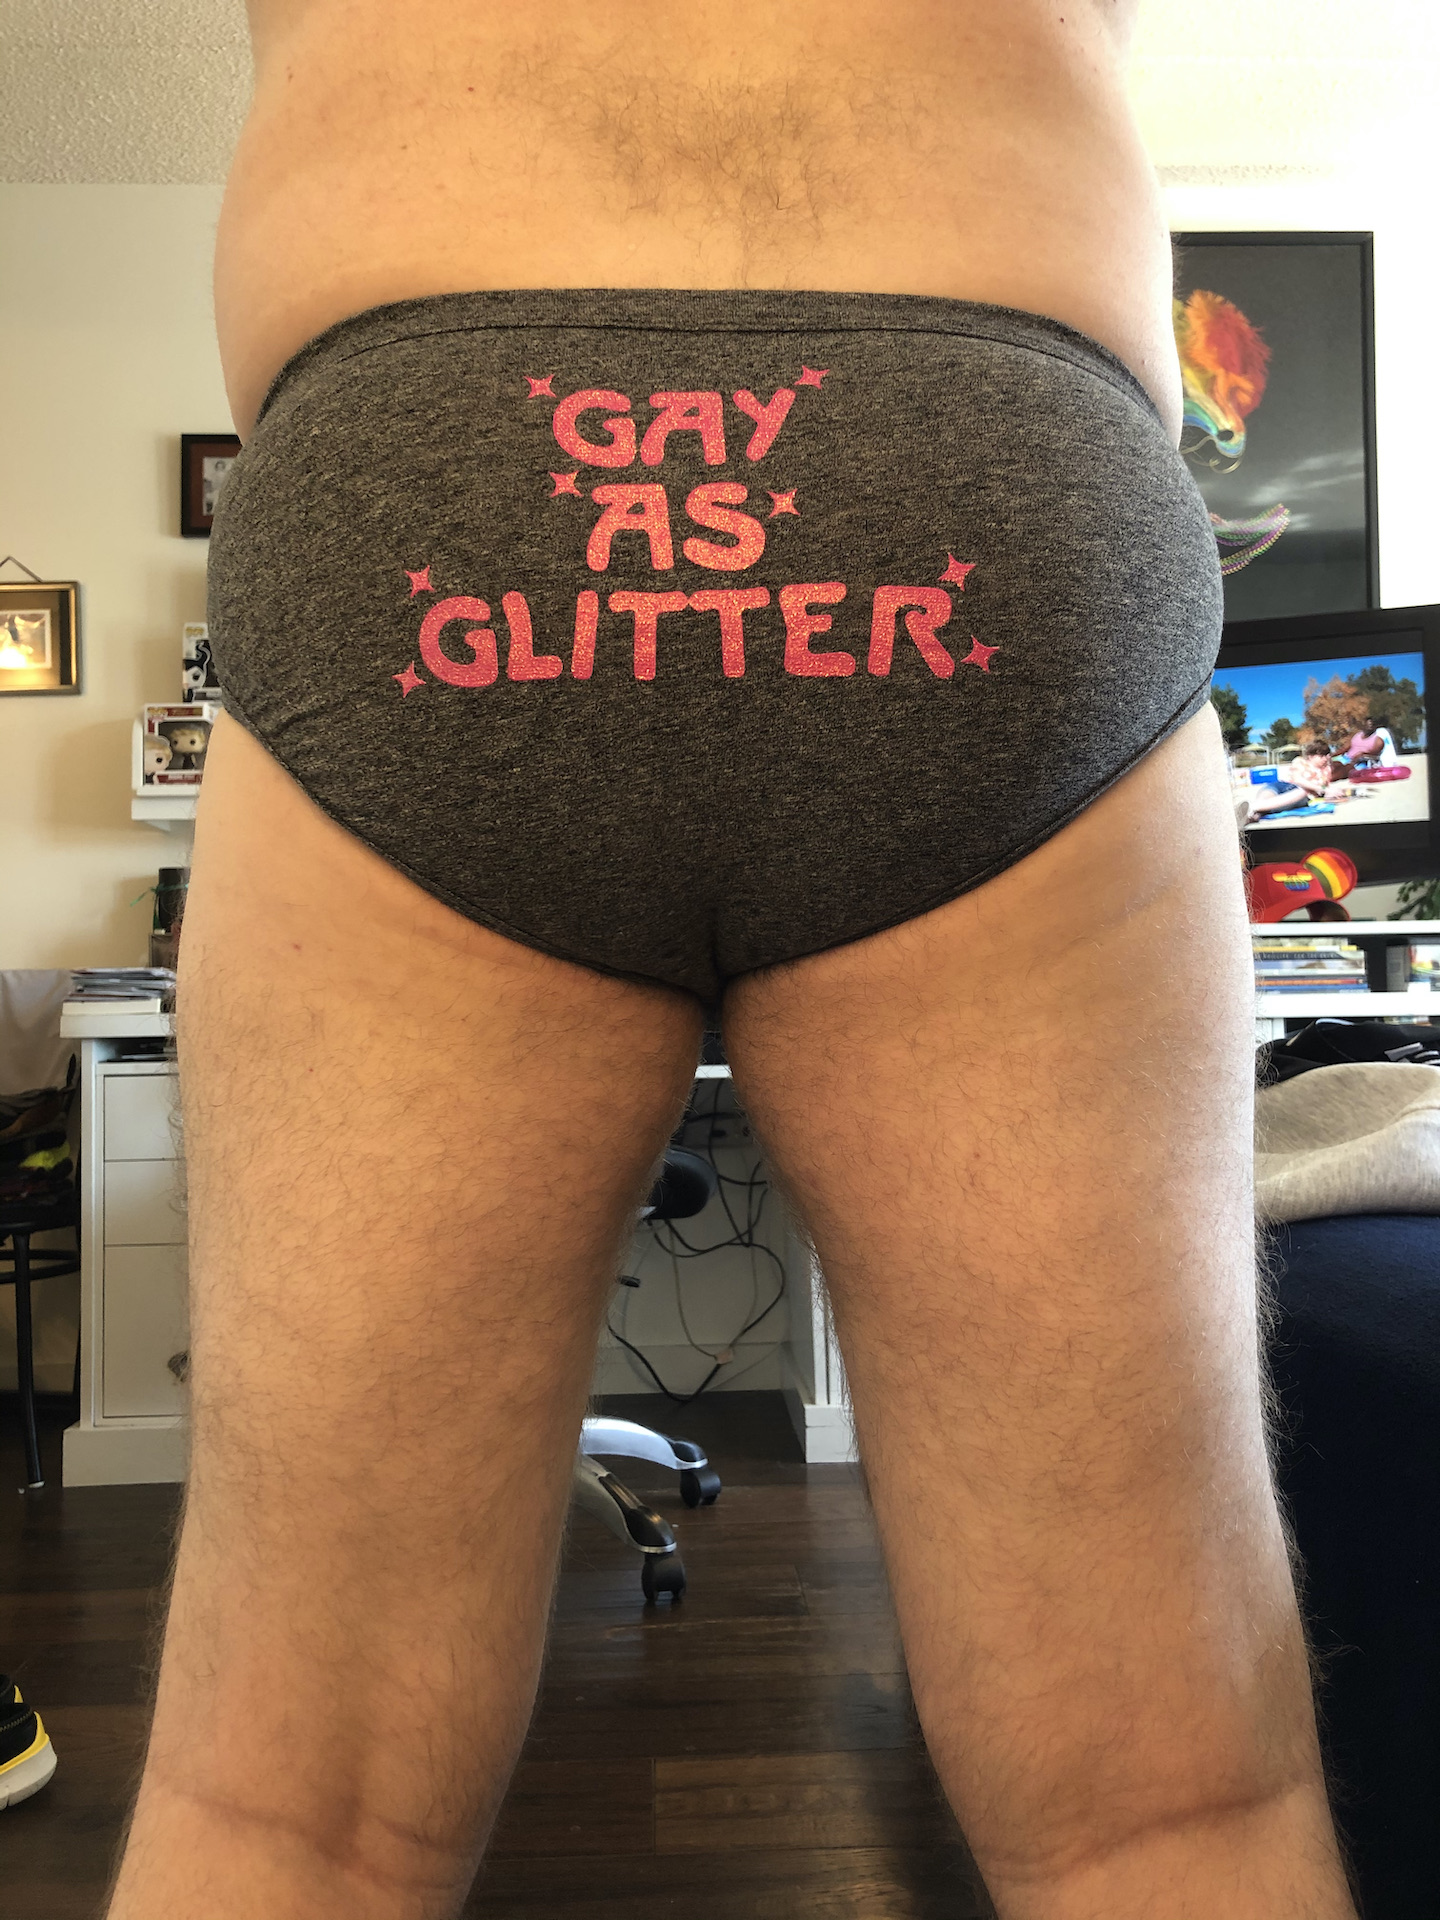 Gay as glitter…which is to say…pretty gay…